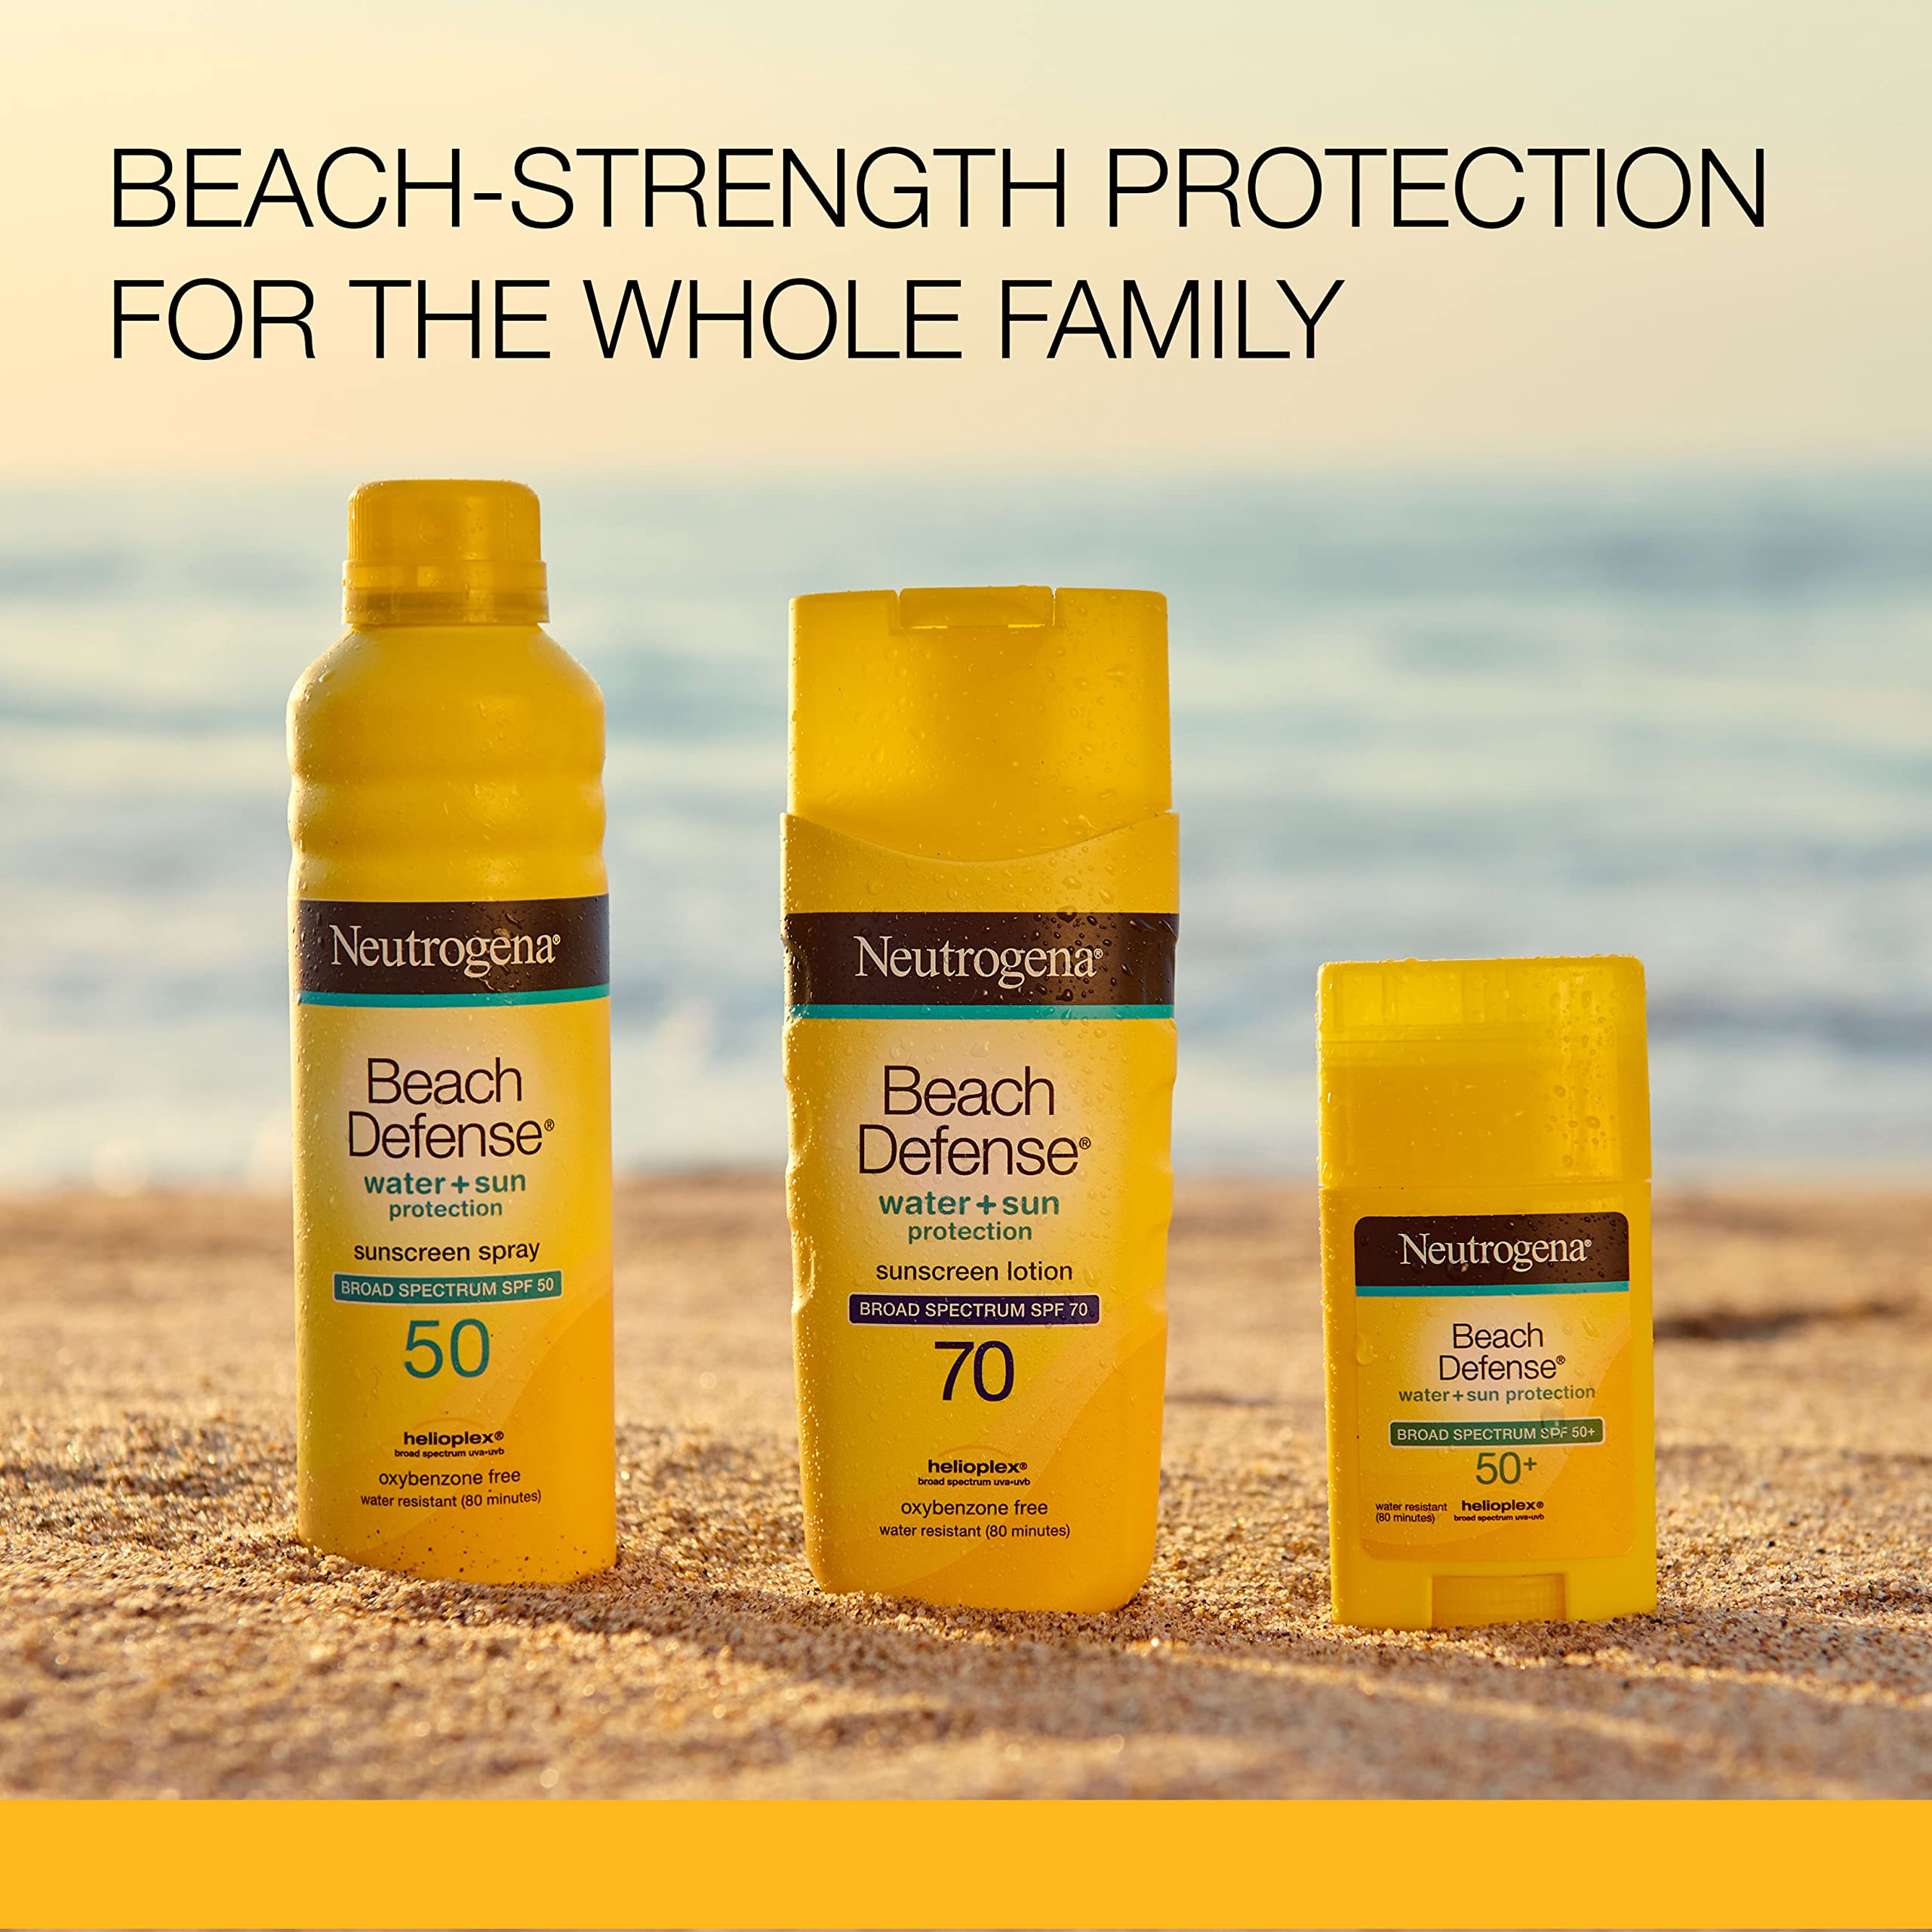 Neutrogena Beach Defense Water-Resistant Sunscreen Lotion with Broad Spectrum SPF 30, Oil-Free and PABA-Free Oxybenzone-Free Sunscreen Lotion, UVA/UVB Sun Protection, SPF 30, 6.7 fl. oz